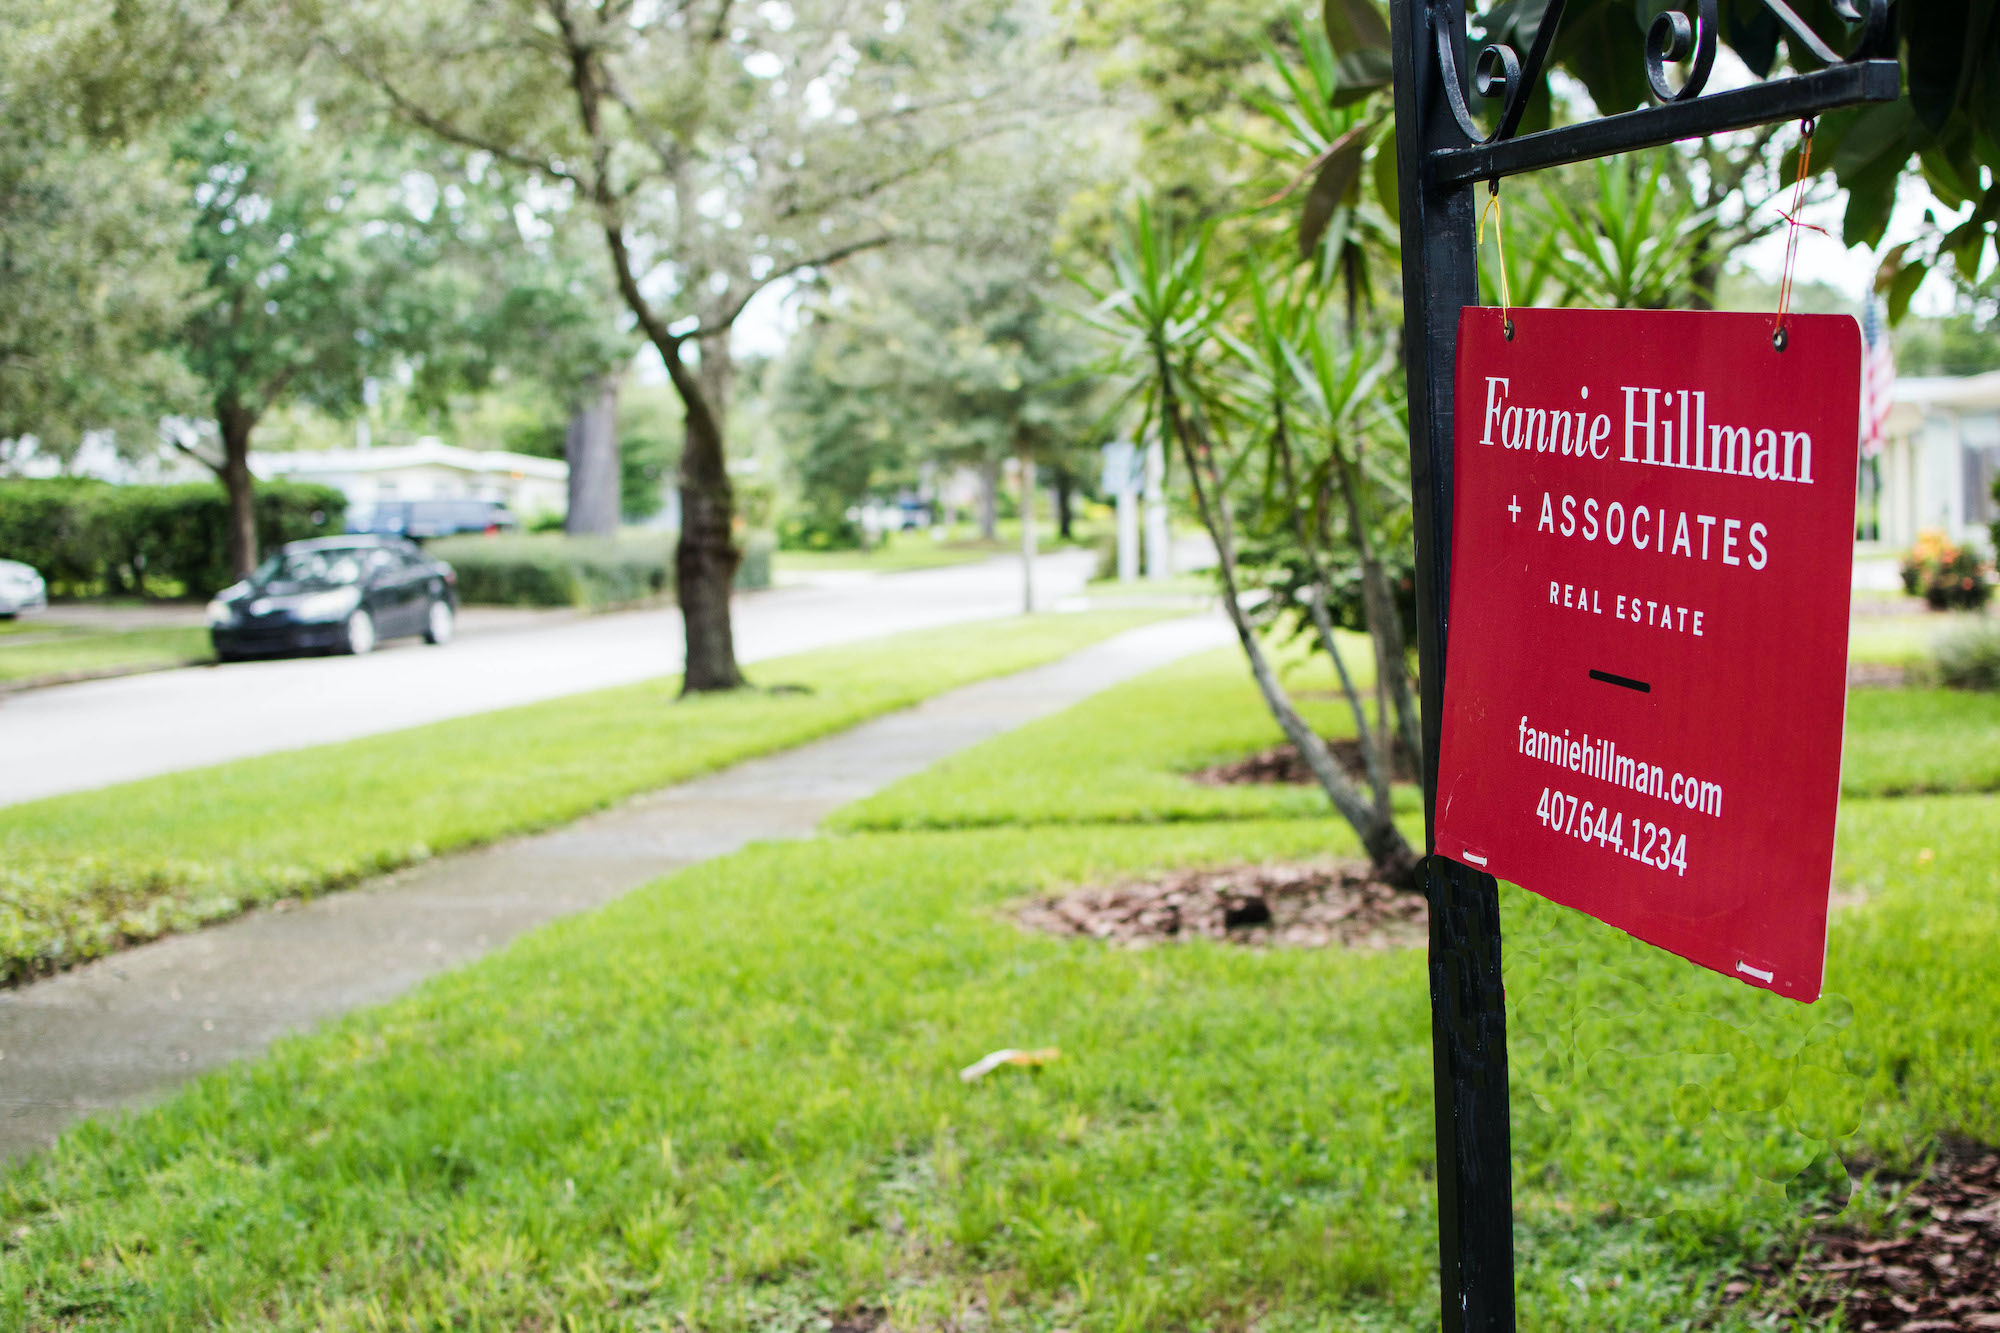 A red Fannie Hillman real estate sign posted in a front lawn.